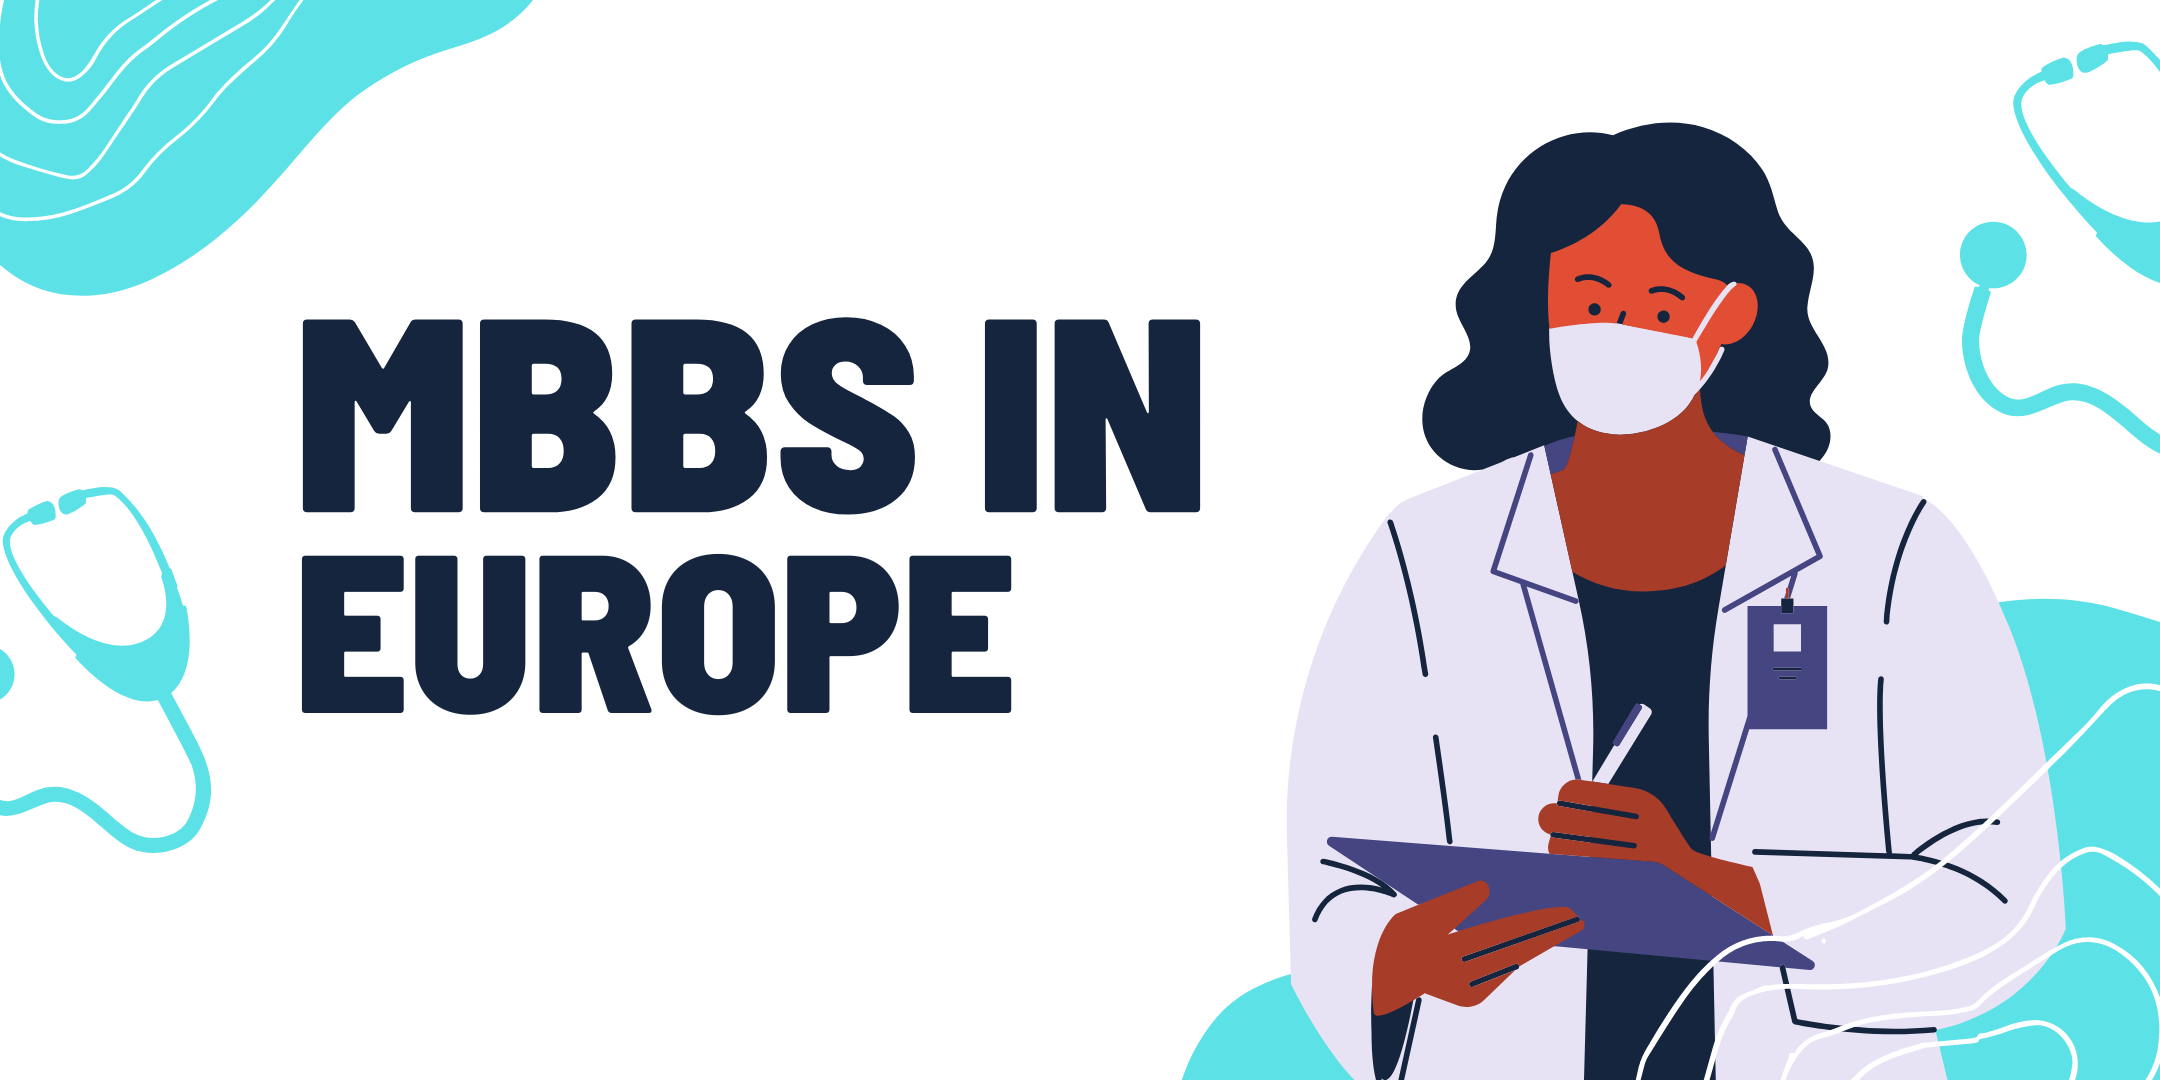 Europe MBBS Fees Trends What's Changing for Students